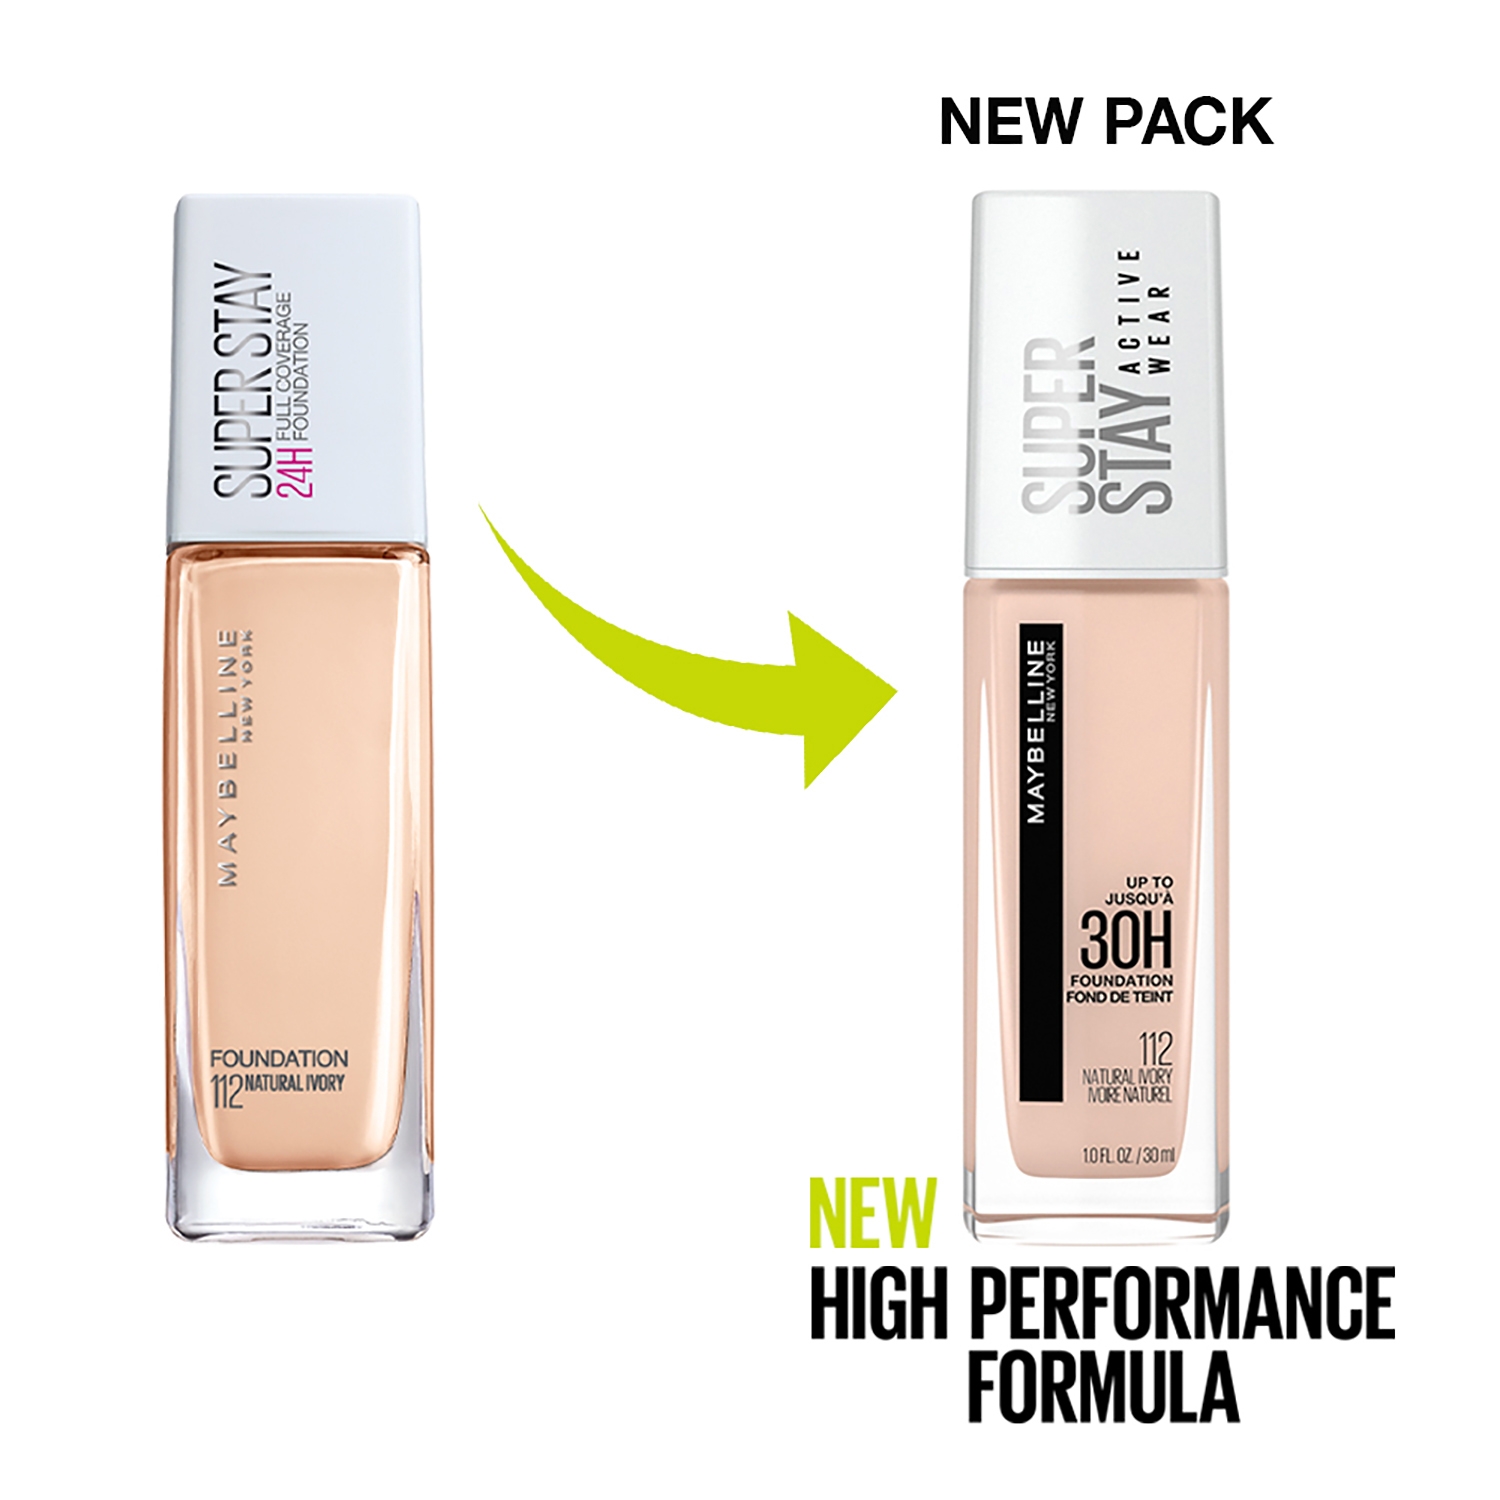 Maybelline New York Super Stay Ivory Natural 24H Liquid (30ml) Foundation - Full Coverage 112